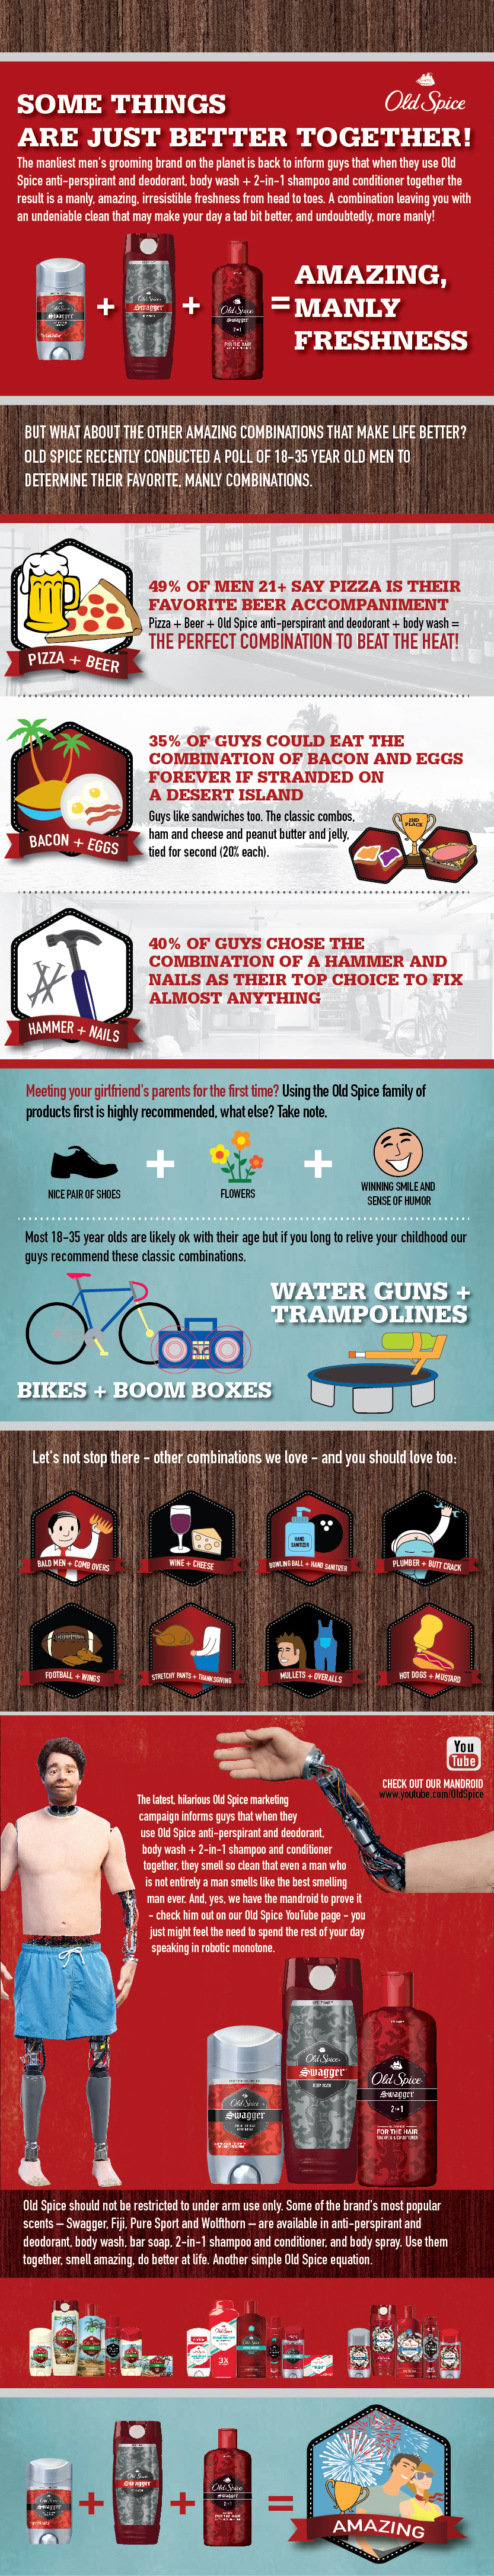 Old spice Infographic